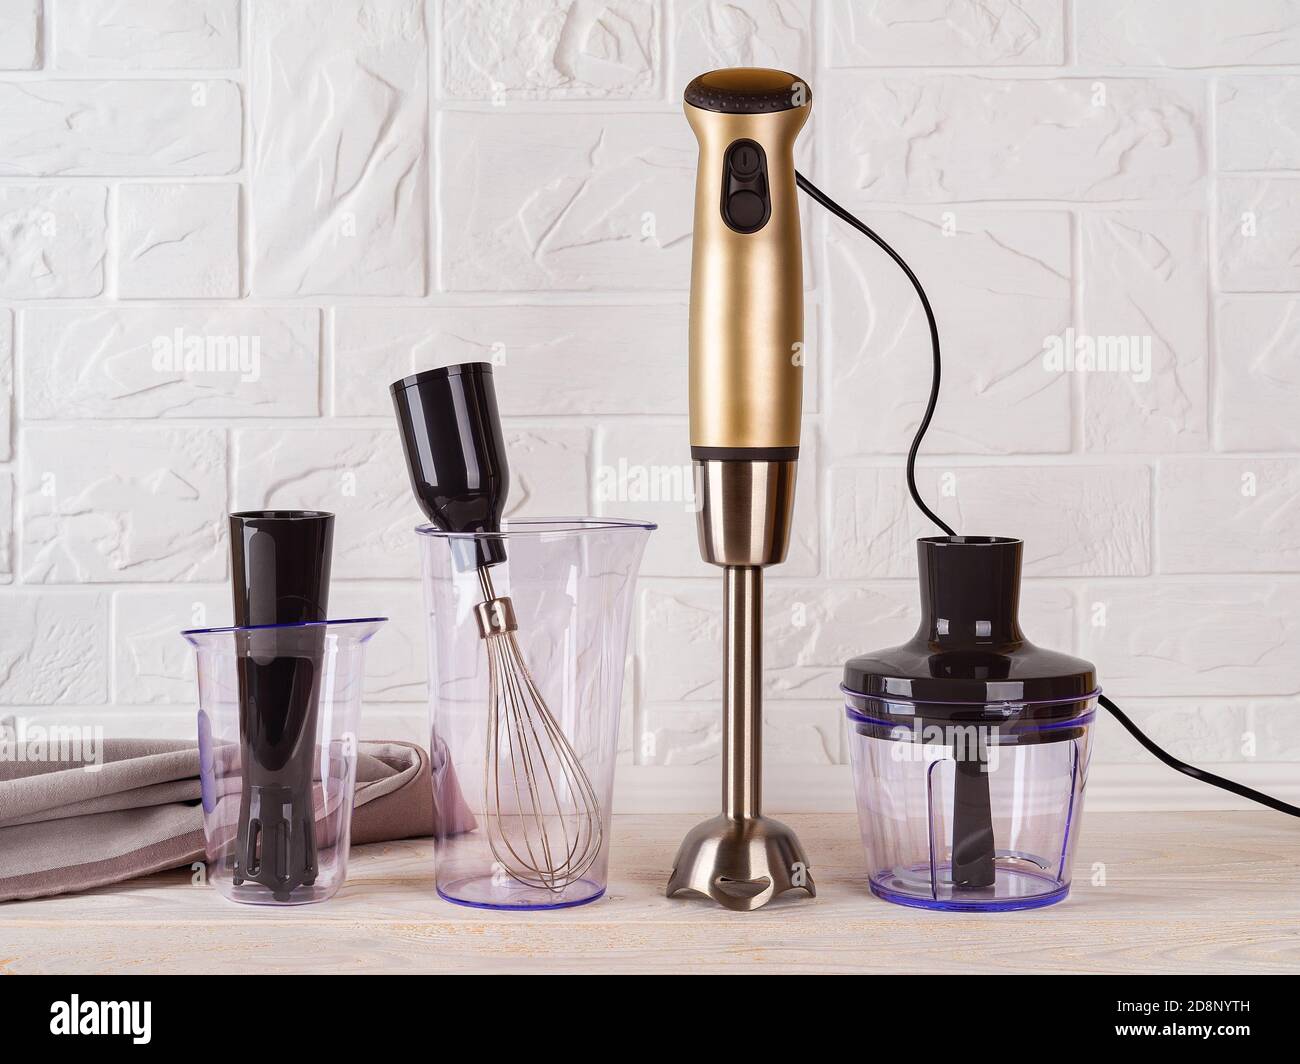 Immersion hand blender with different attachments and two cups on wood table. Electric kitchen appliances for making sauces, smoothies, puree. Stock Photo